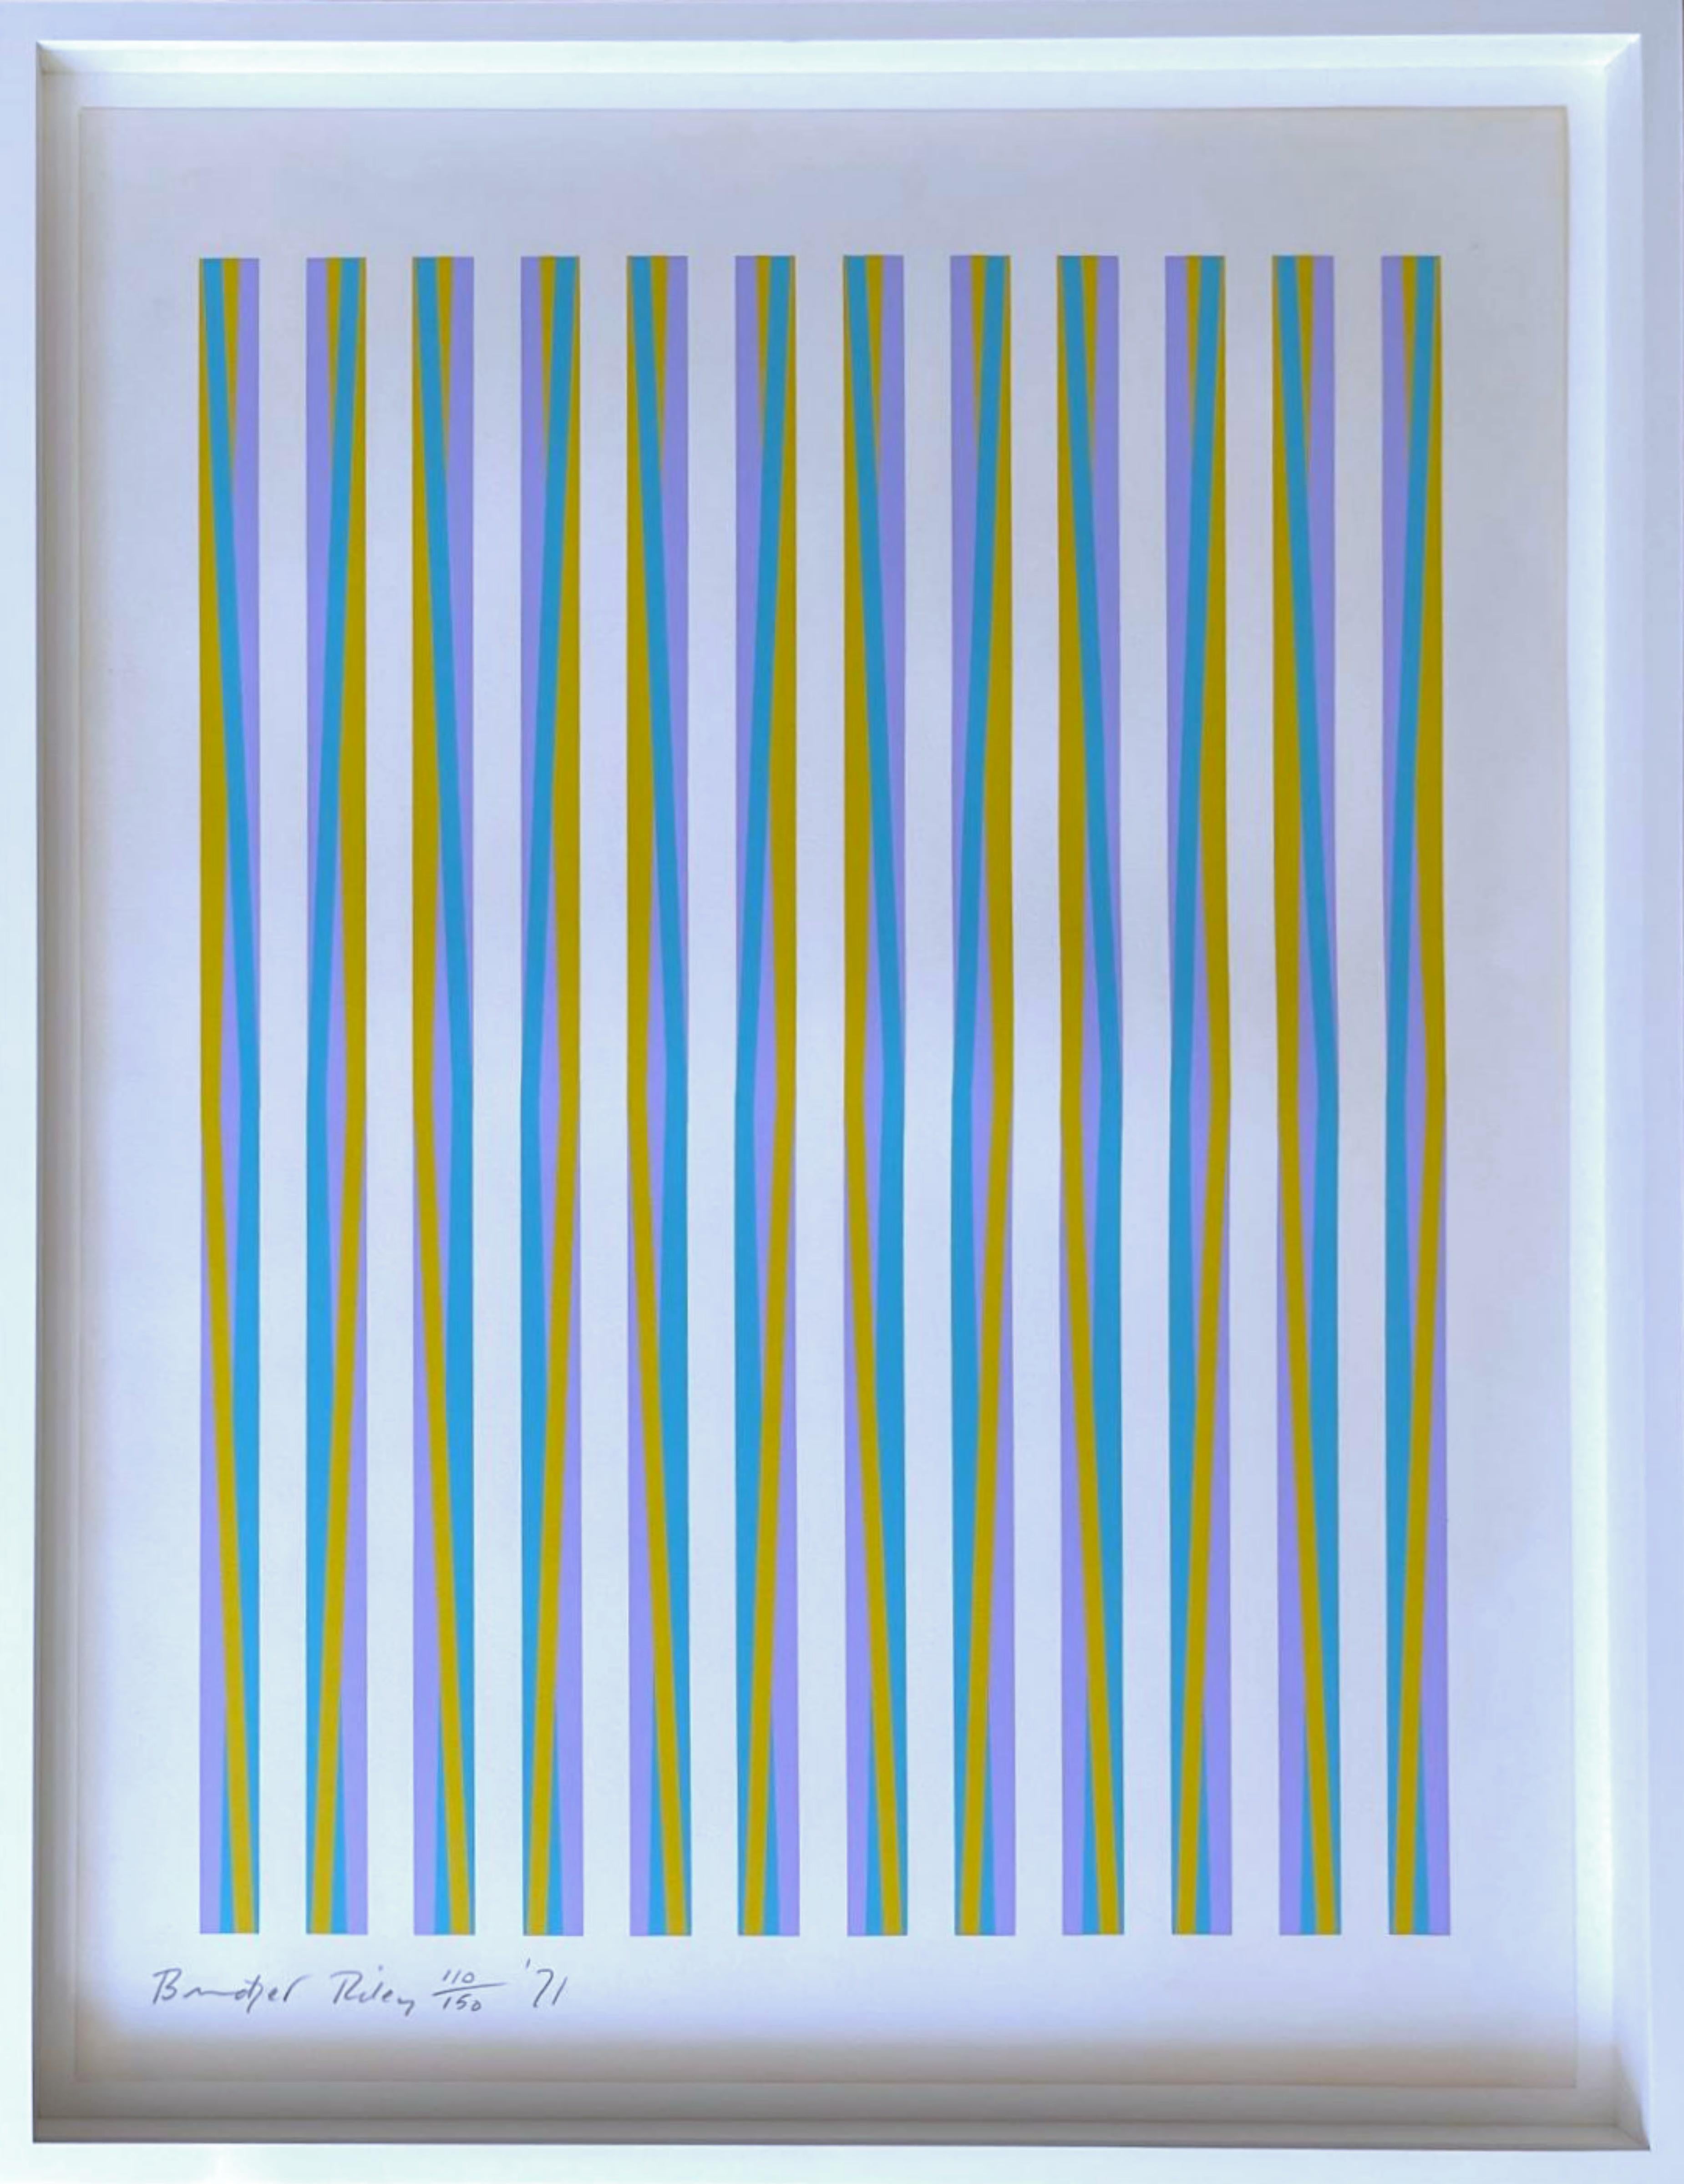 Silkscreen for Conspiracy: The Artist as Witness, iconic 1970s, signed/N Framed - Print by Bridget Riley